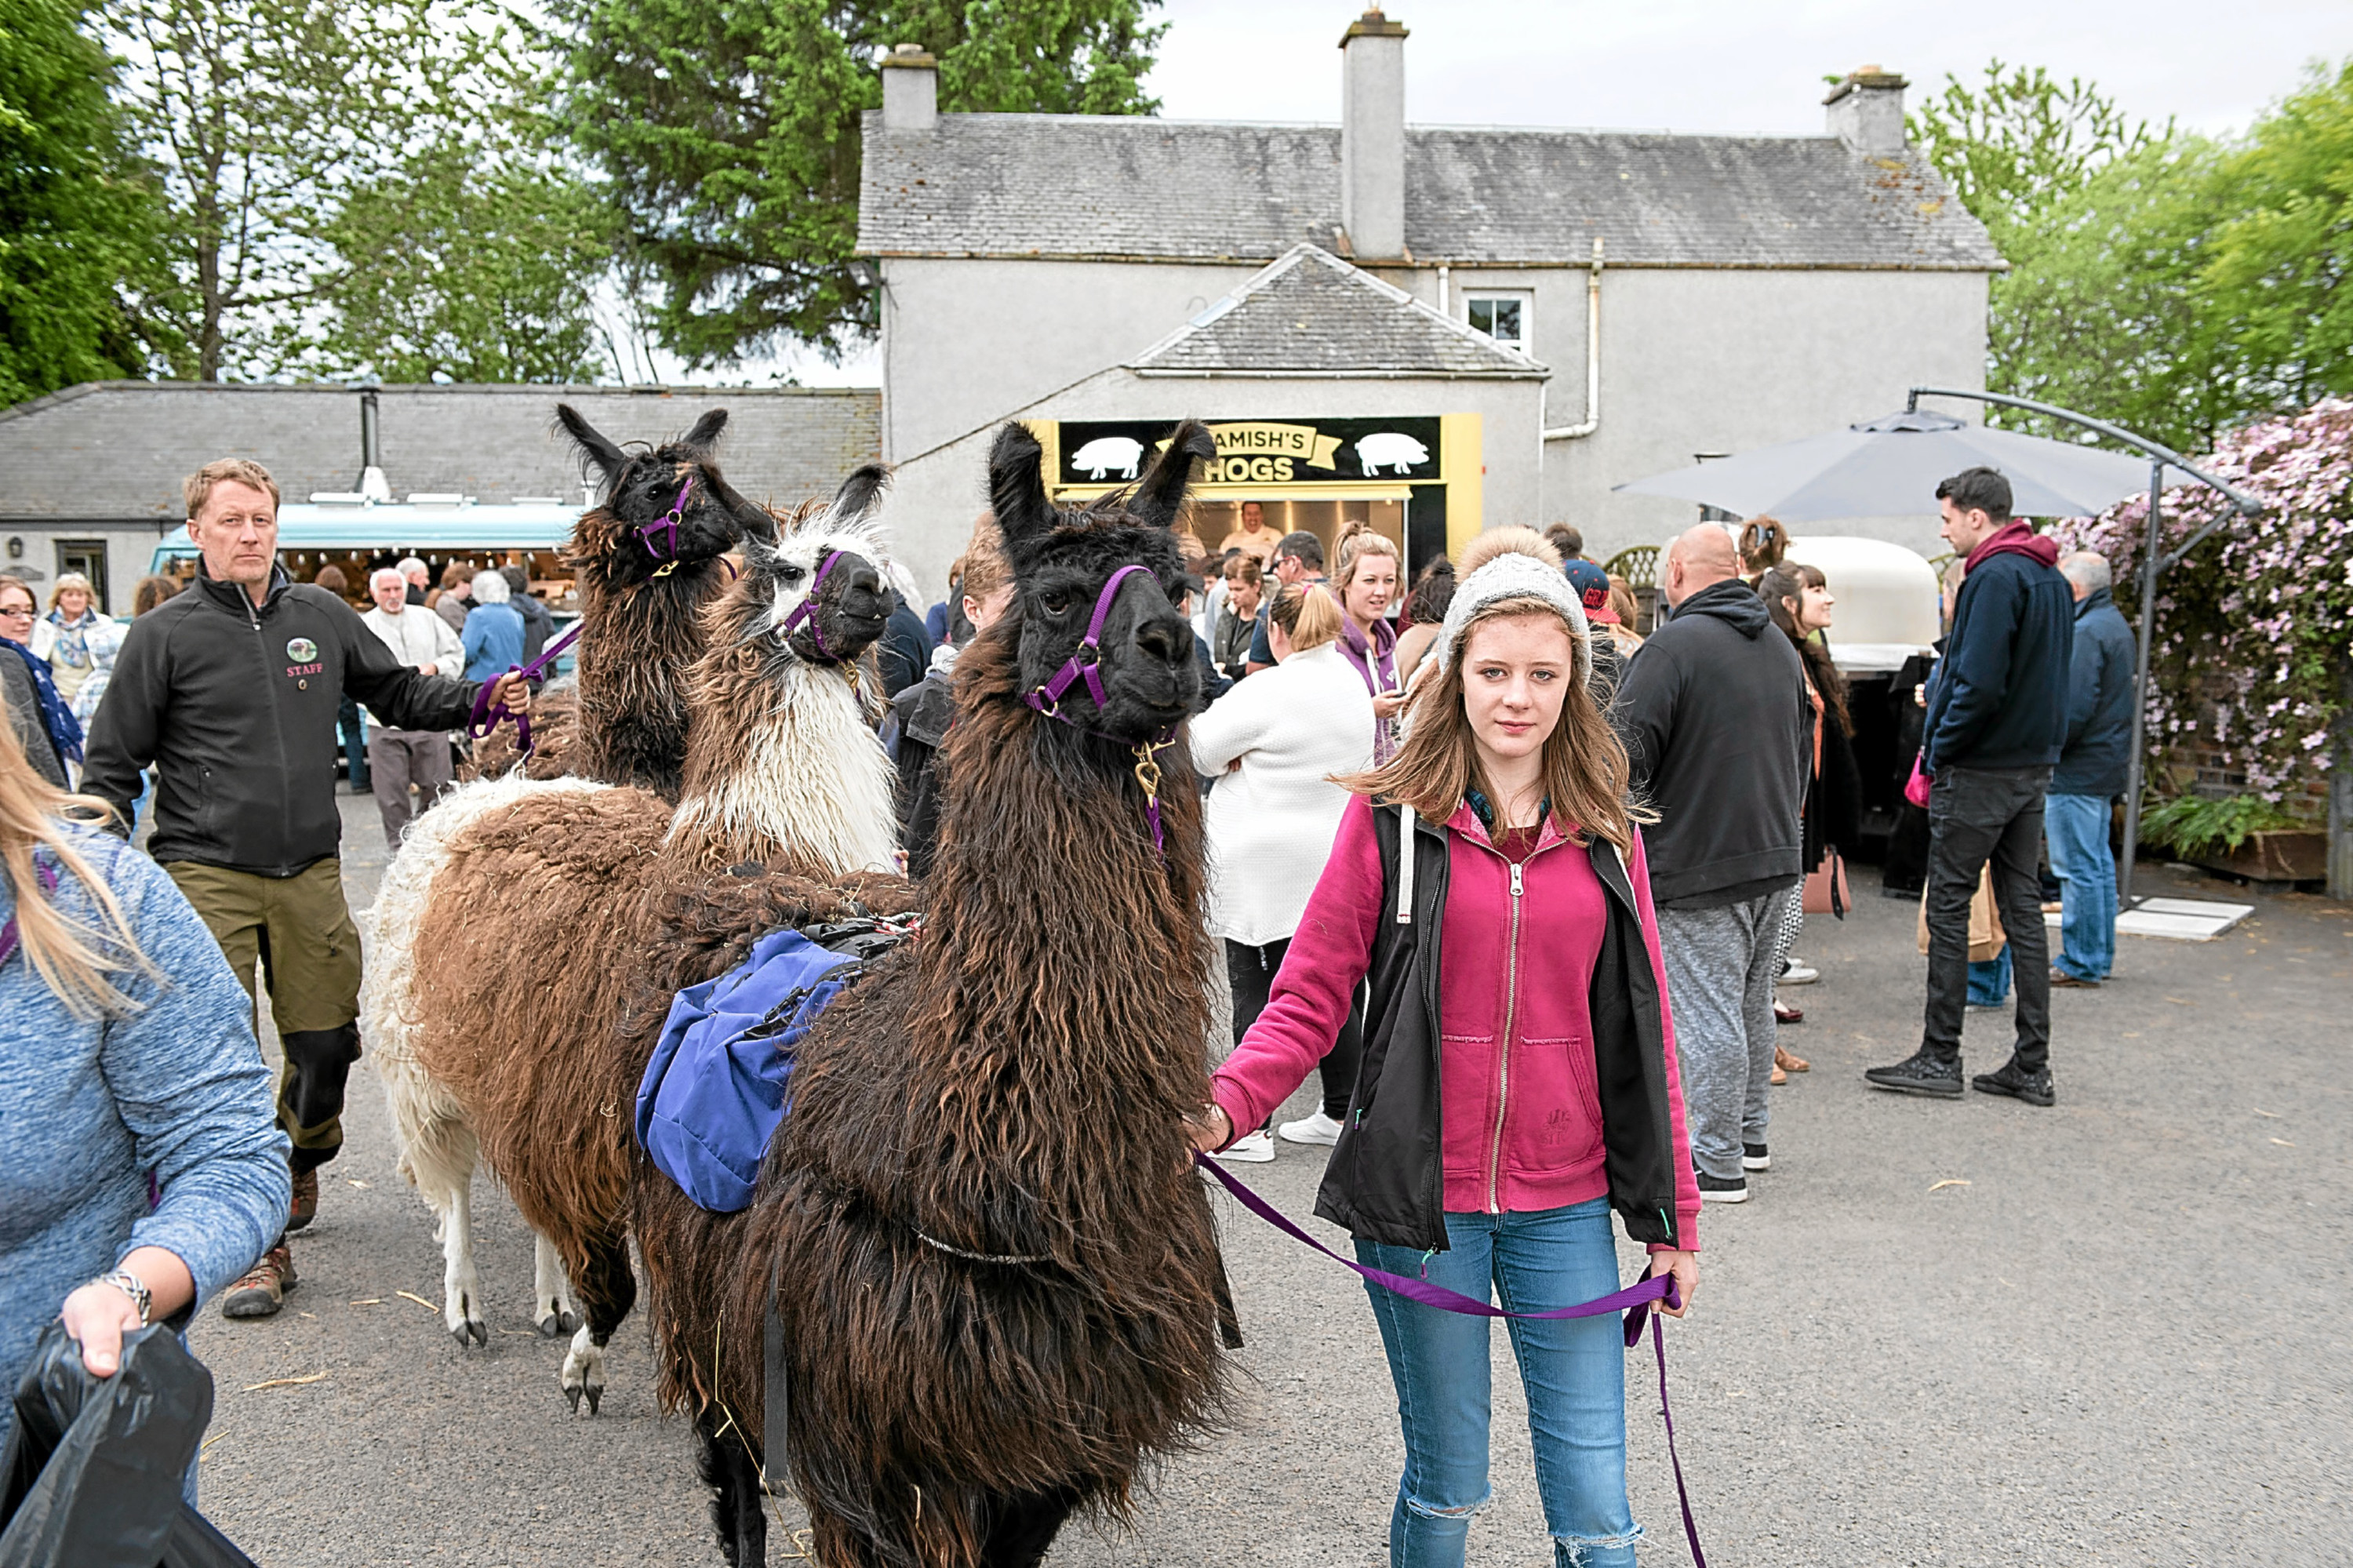 A summer night market at Peel Farm, near Lintrathen featured members of the Angus Food Life group, giving the visiting public the chance to sample local produce from suppliers including Fresh Food Express, Artisana, Muckle Backit Oven, Hamish Hogs, The Gin Bothy and Kirrie Ales, as well as meeting a trio of llamas. 
The group has been set up to establish the high quality food and drink available in Angus and will be staging a series of pop-up events.


© Andy Thompson Photography / ATIMAGES 

No use without payment. 
 

20160602- Summer Night Market at Peel Farm featuring members of The Food Life group. It was a busy evening at Peel Farm where members of the public got to sample local produce from suppliers Fresh Food Express, Artisana, Muckle Backit Oven, Hamish Hogs, The Gin Bothy and Kirrie Ales and also meet a trio of lamas. 

© Andy Thompson Photography / ATIMAGES 

No use without payment.